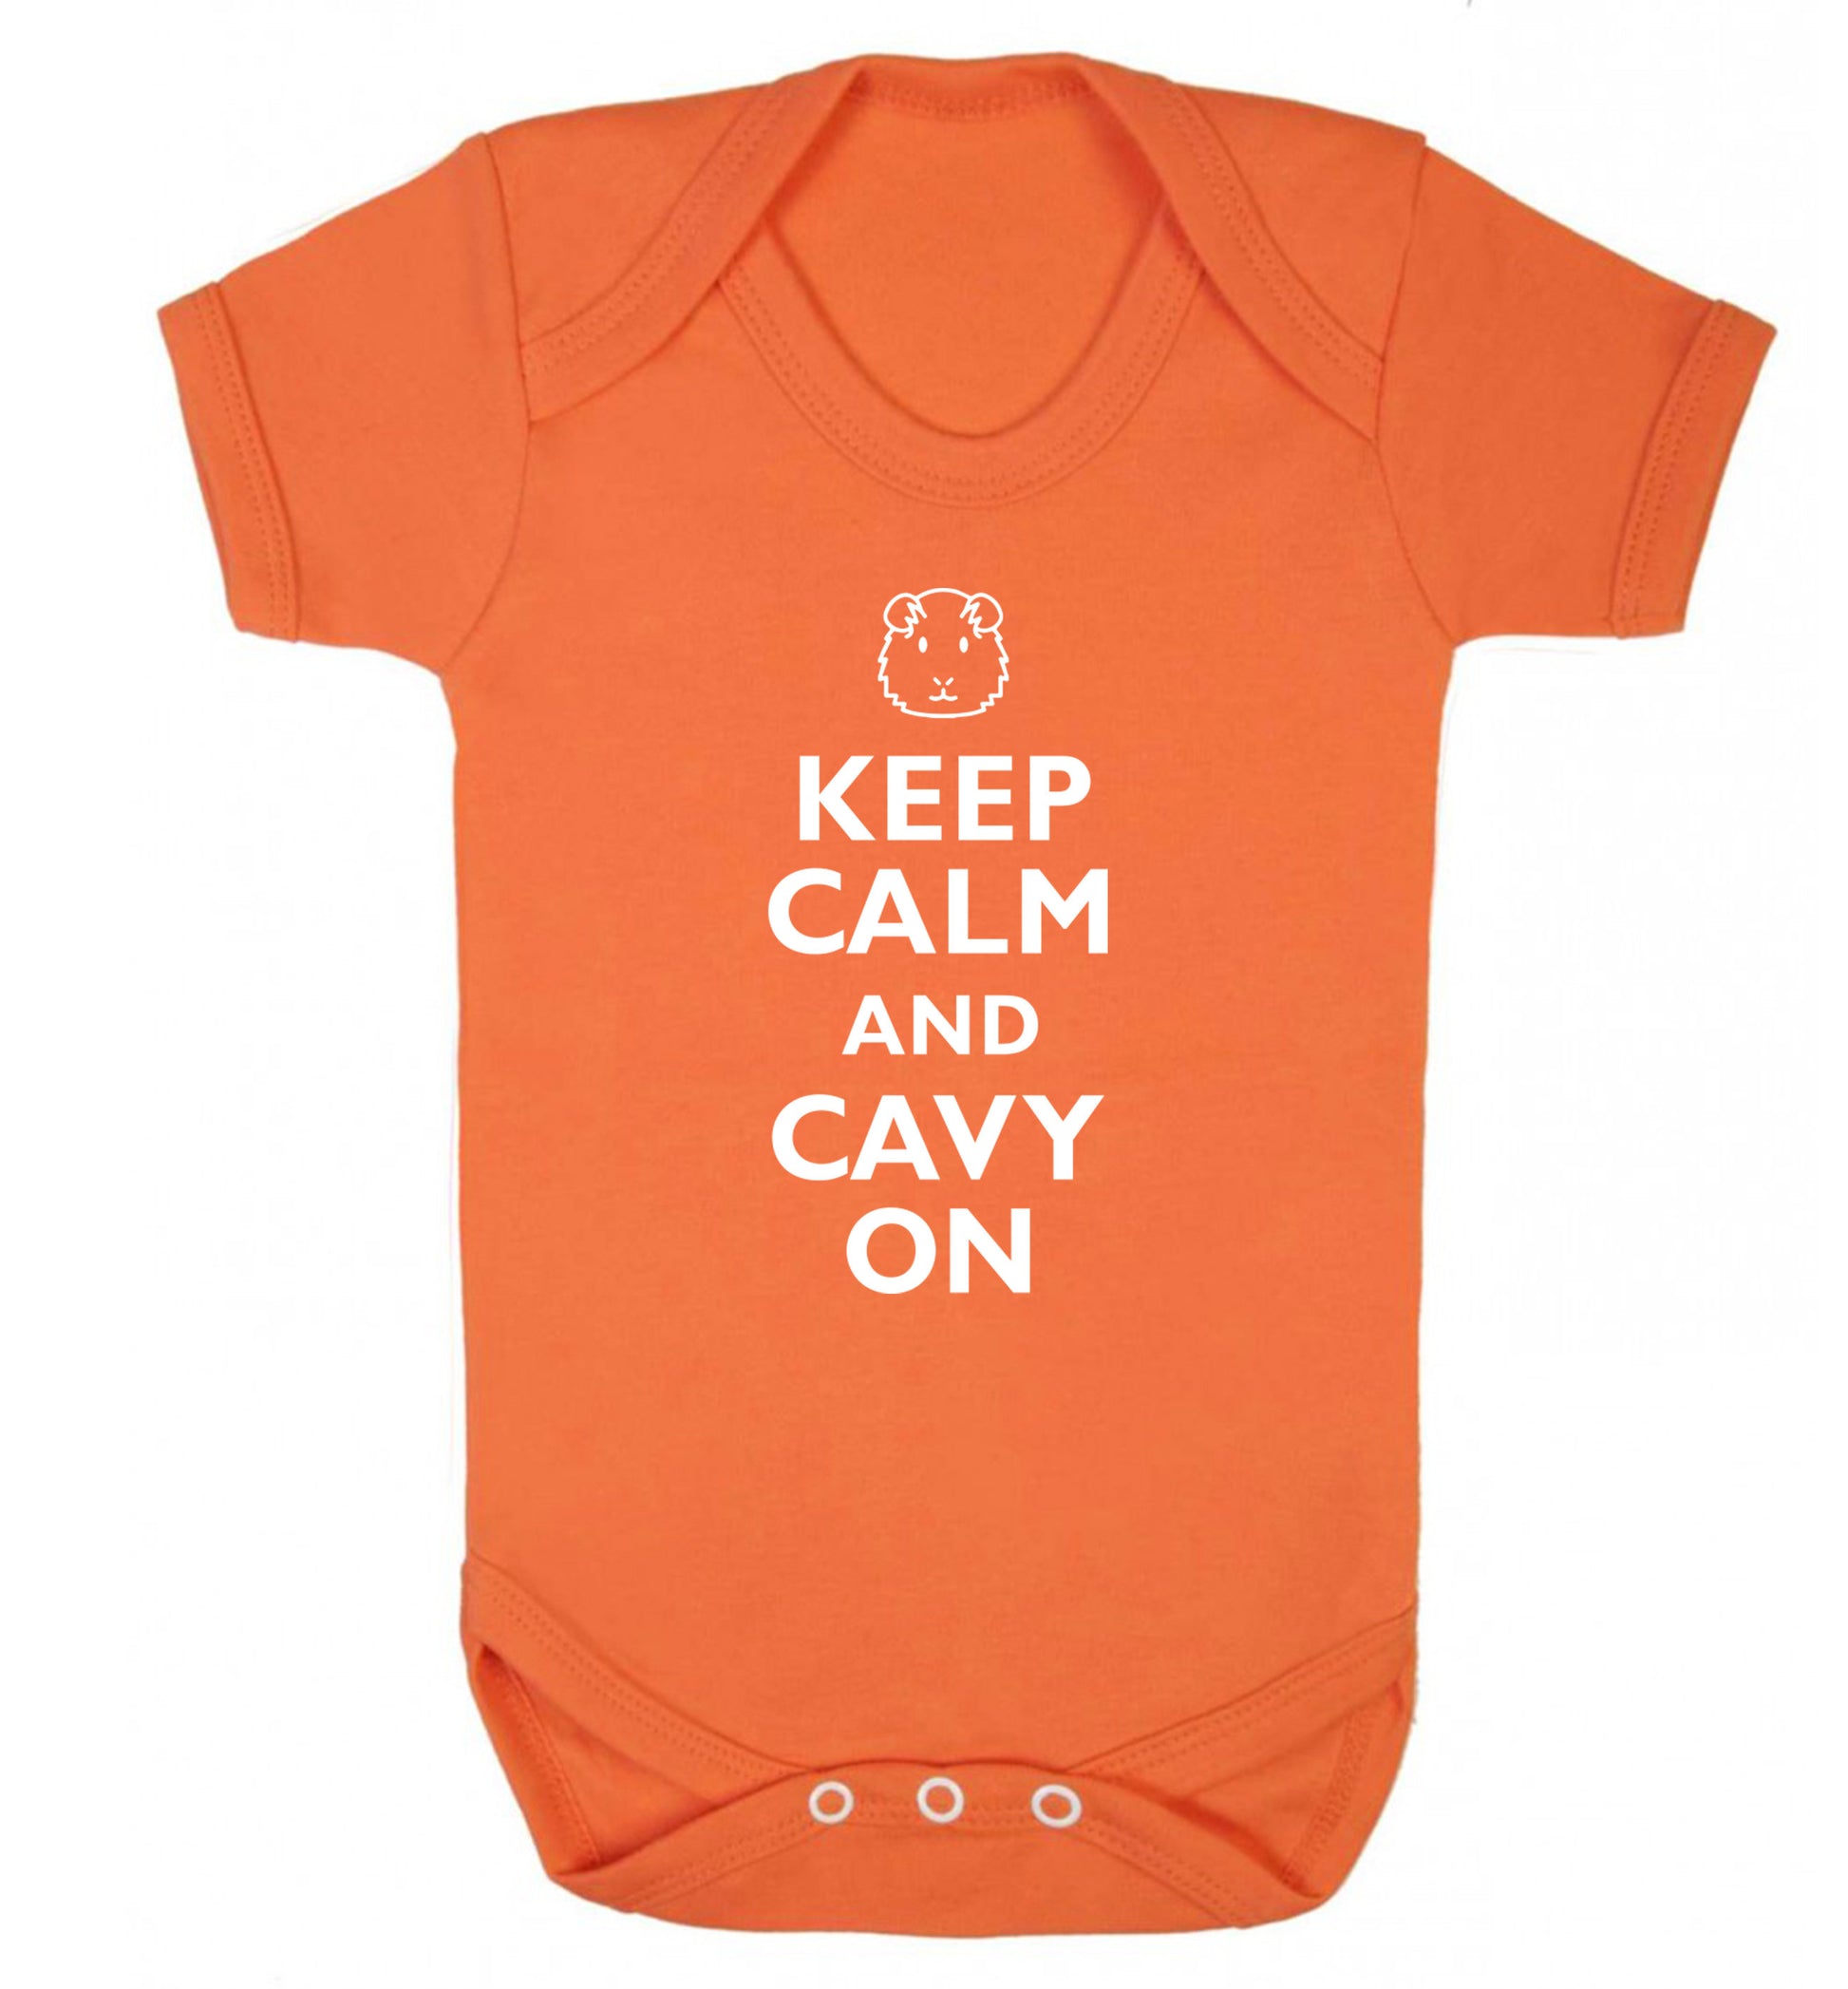 Keep calm and cavvy on Baby Vest orange 18-24 months